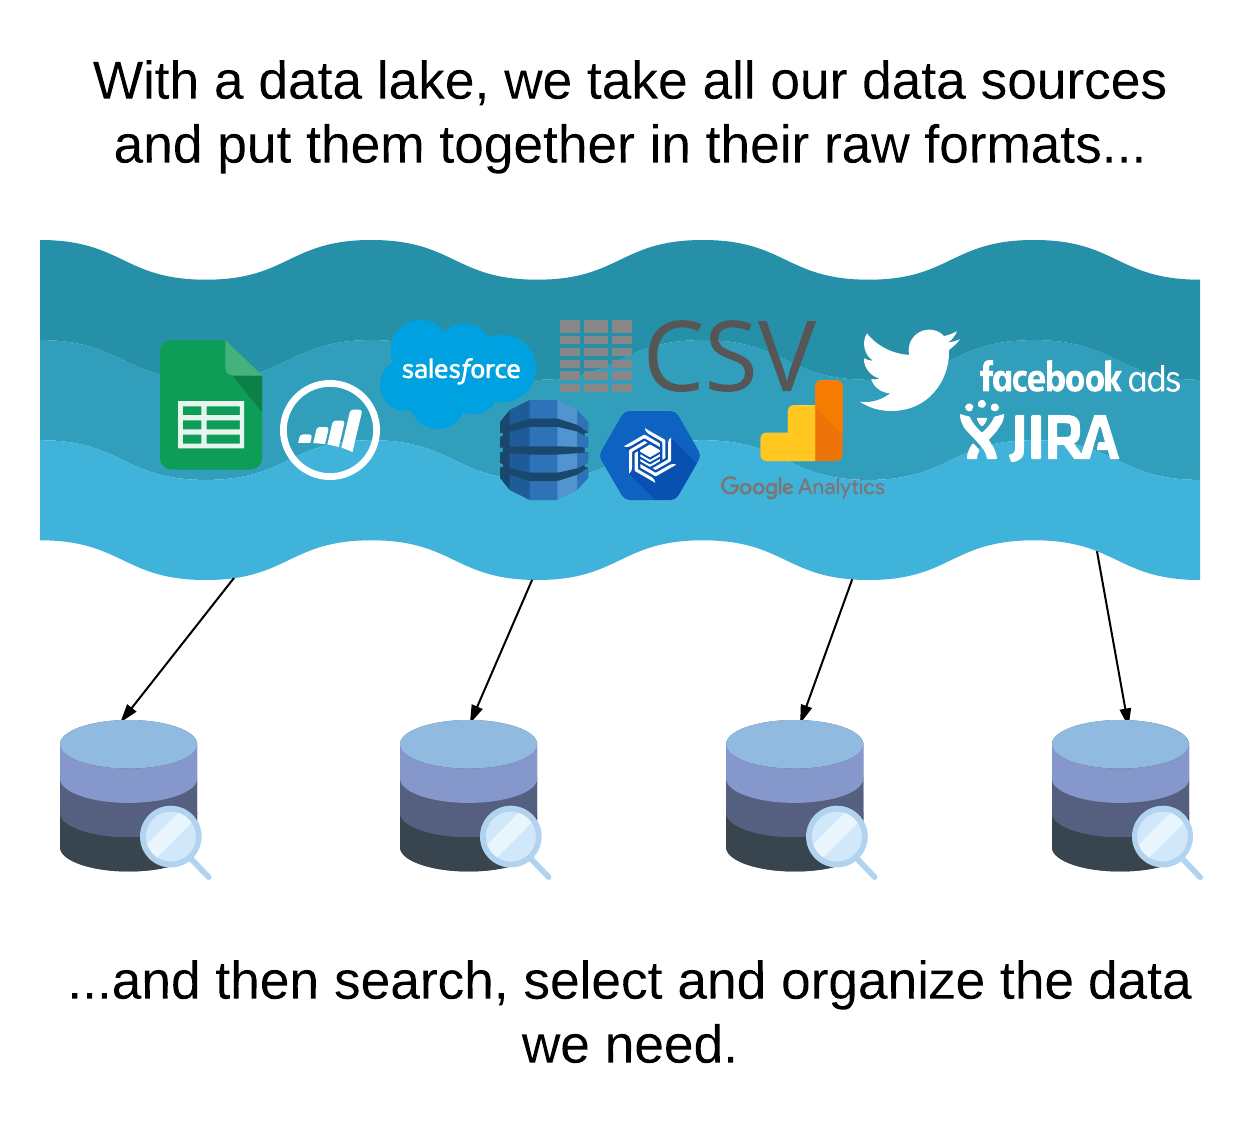 With a data lake, we take all our data sources and put them together in their raw formats and then search, select and organize the data as we need each time 